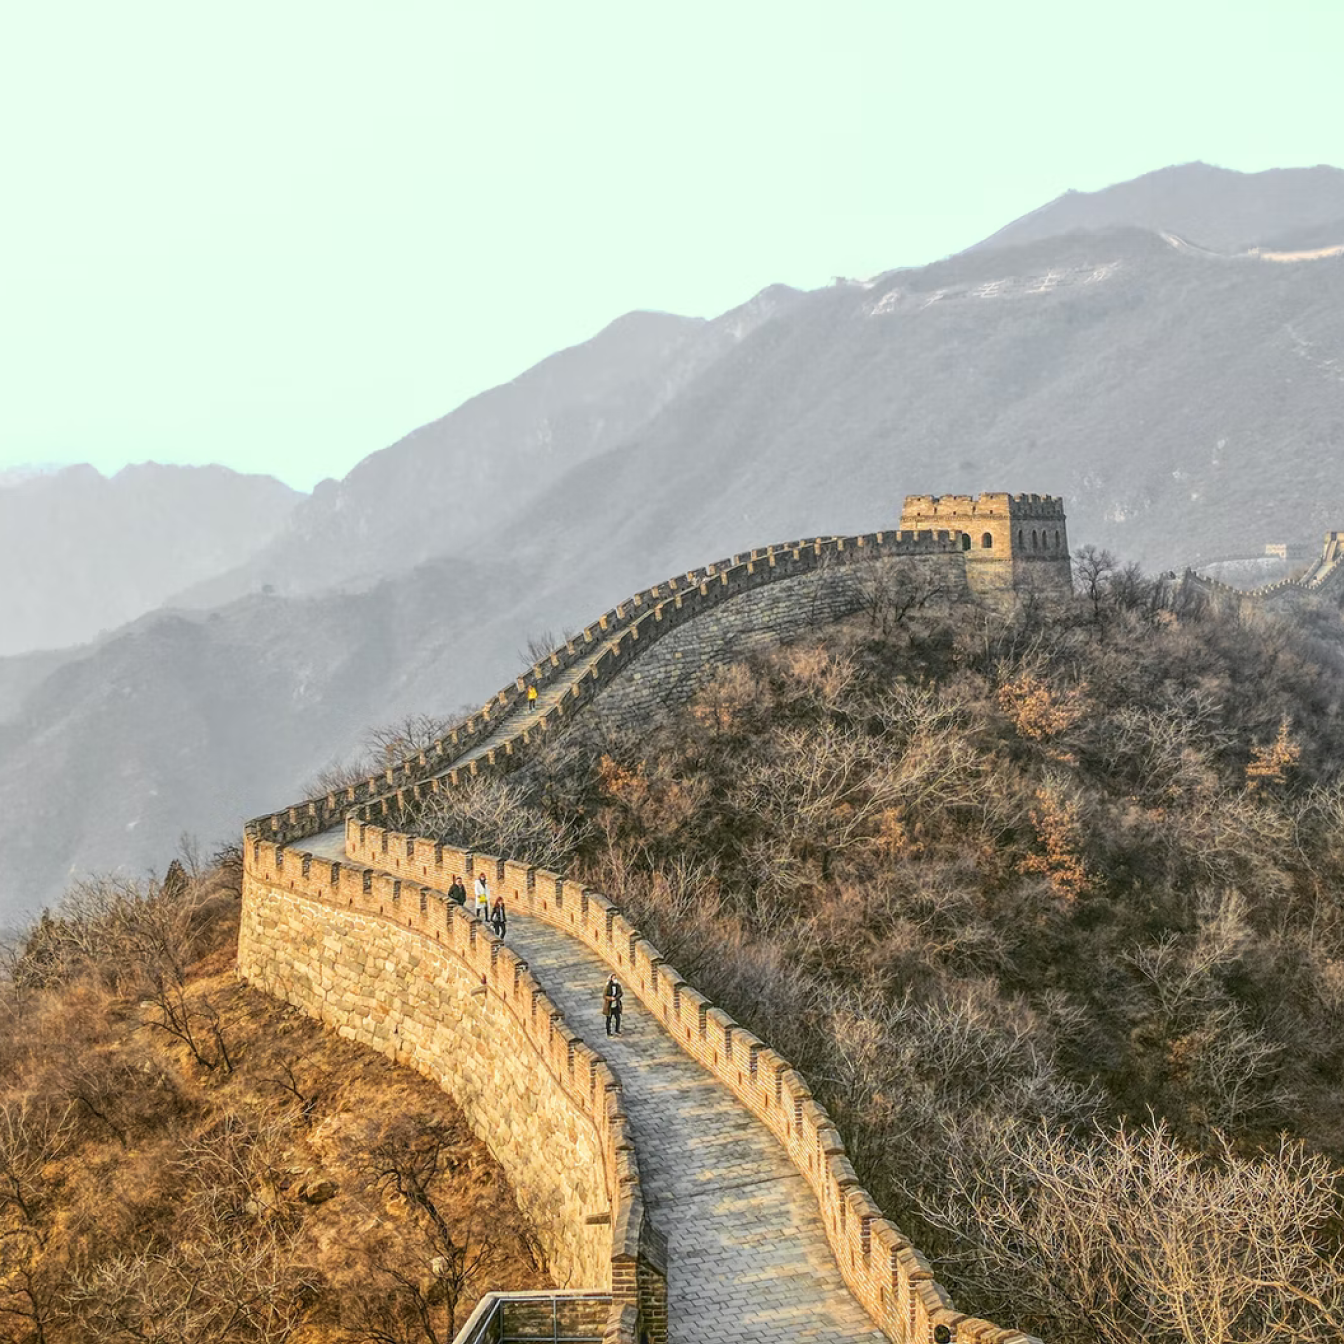 Stunning mountainous landscape surrounding the Great Wall of China, with a portion of the stone wall and a watchtower.